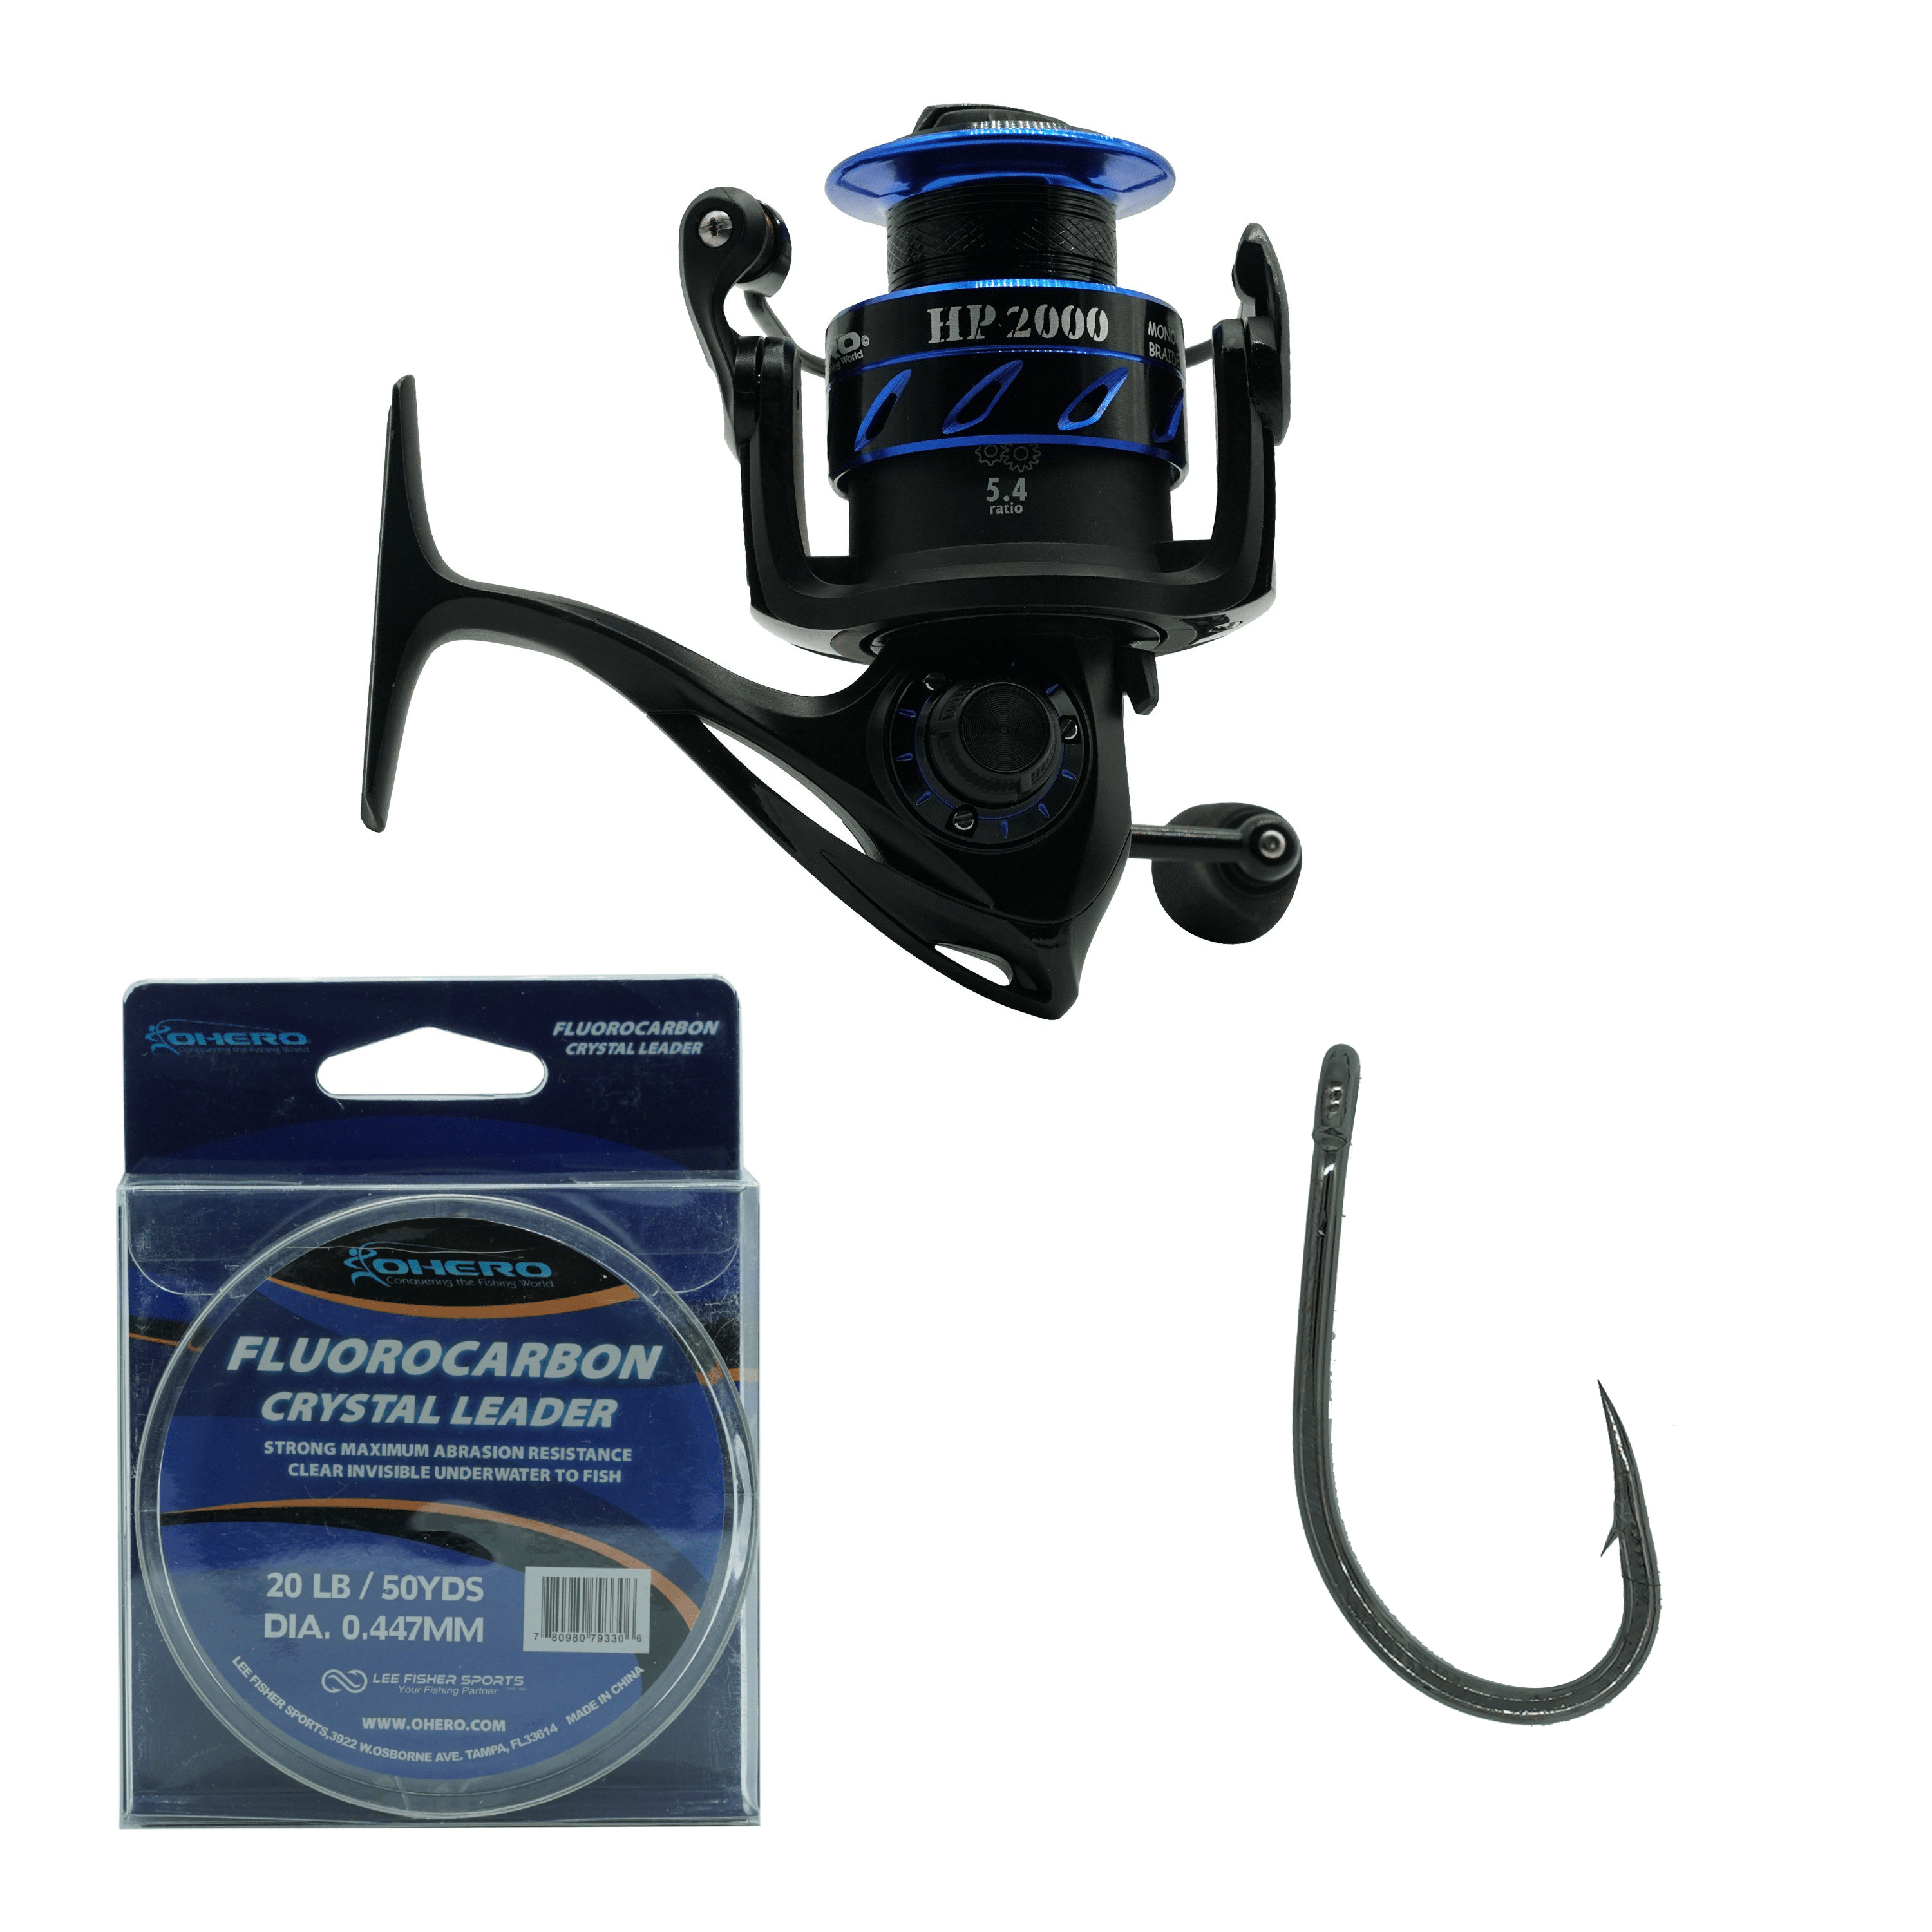 lee-fisher-sports-labor-day-special-hp2000-fca15a50-ck1136-2005-hyper-reel-a-b-c-special-hp2000-hp3000-15743713935463.png?v=1604426811